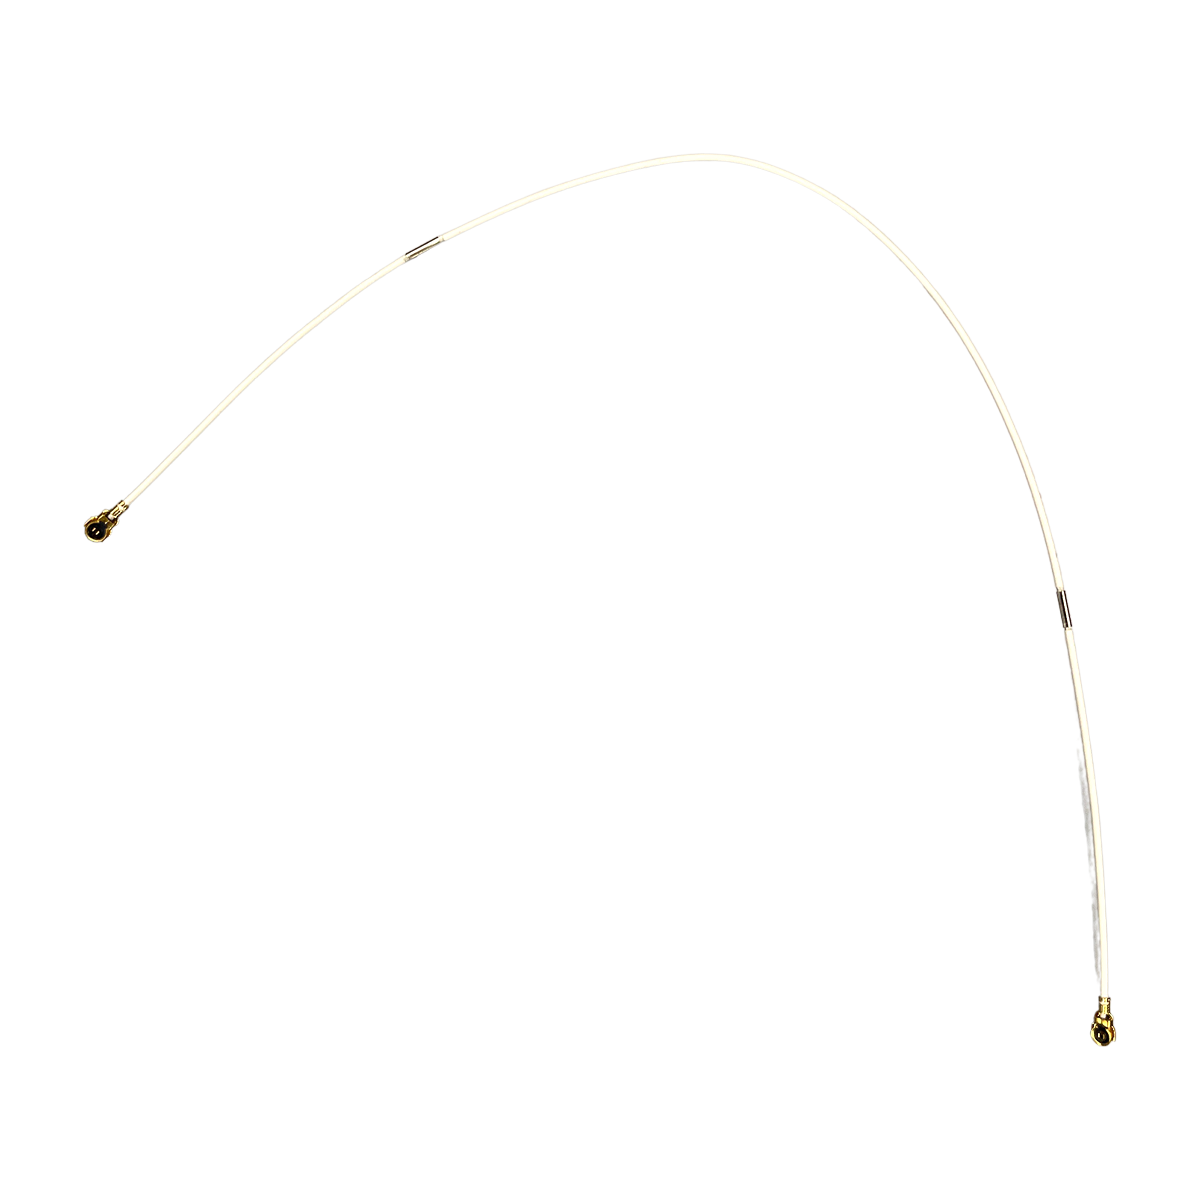 OnePlus 6T (A6010 / A6013) Antenna Connecting Cable